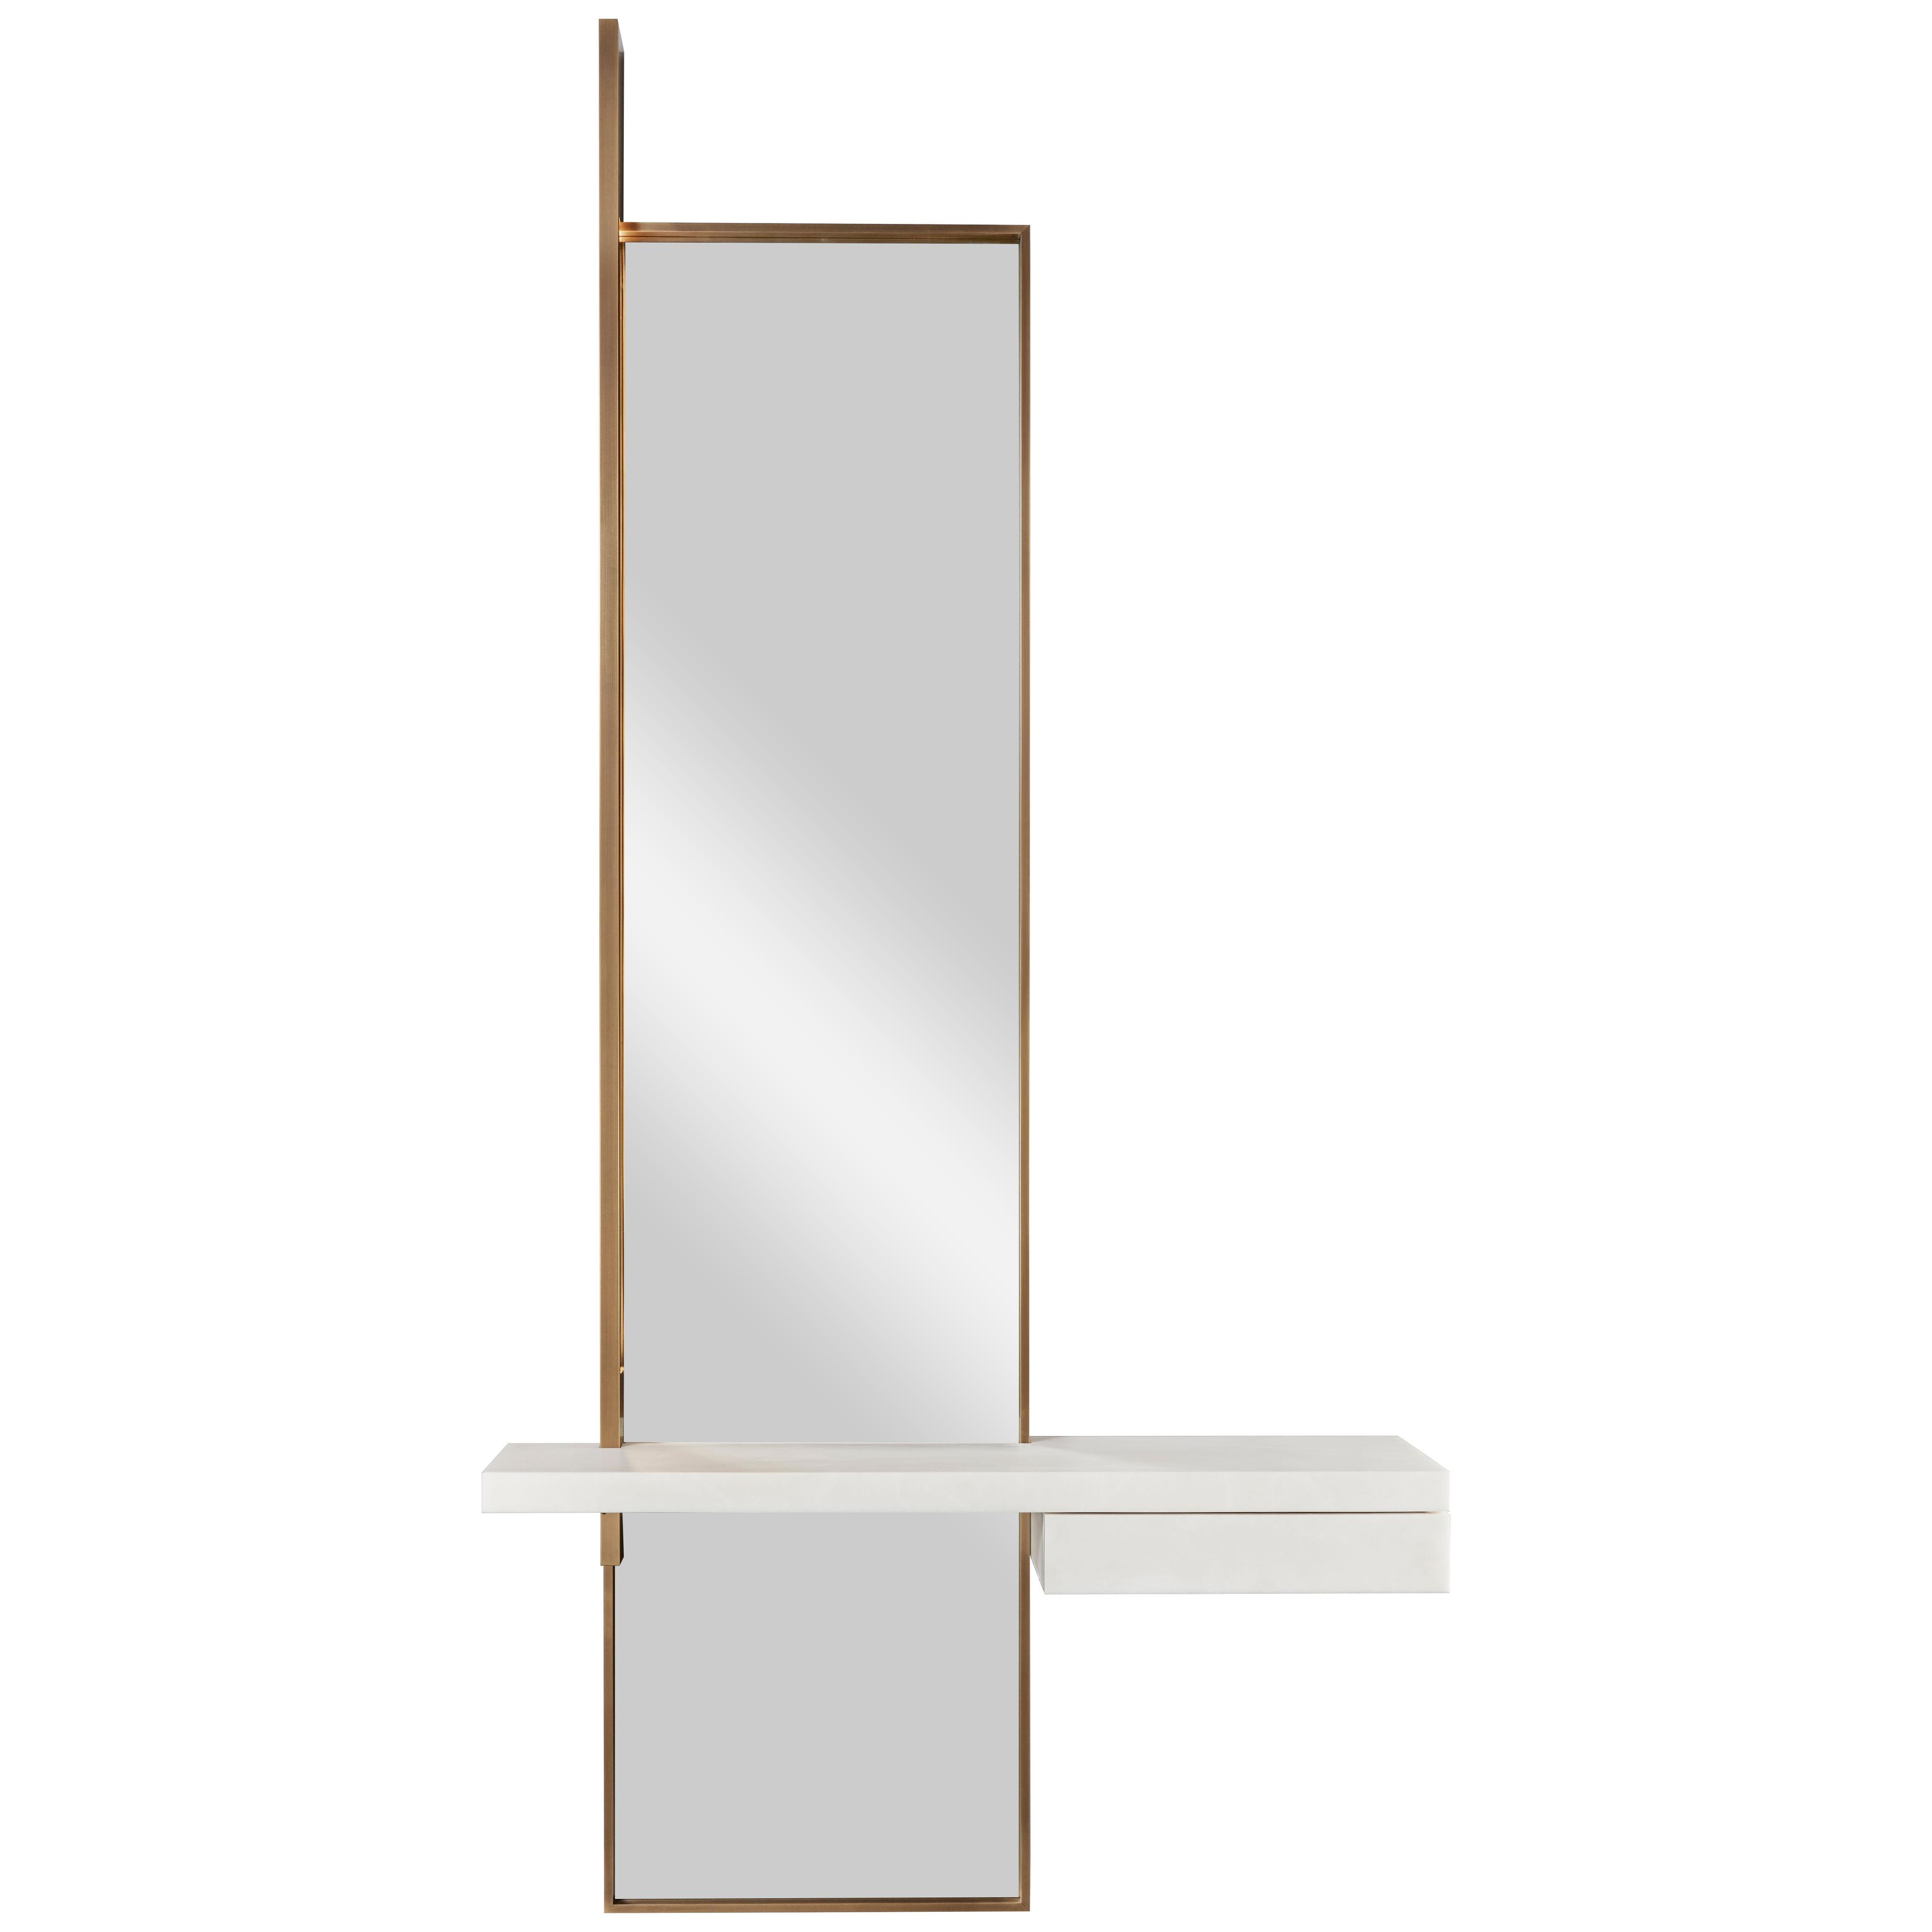 'Ellipse' High Mirror by Isabelle Stanislas including Integrated Light